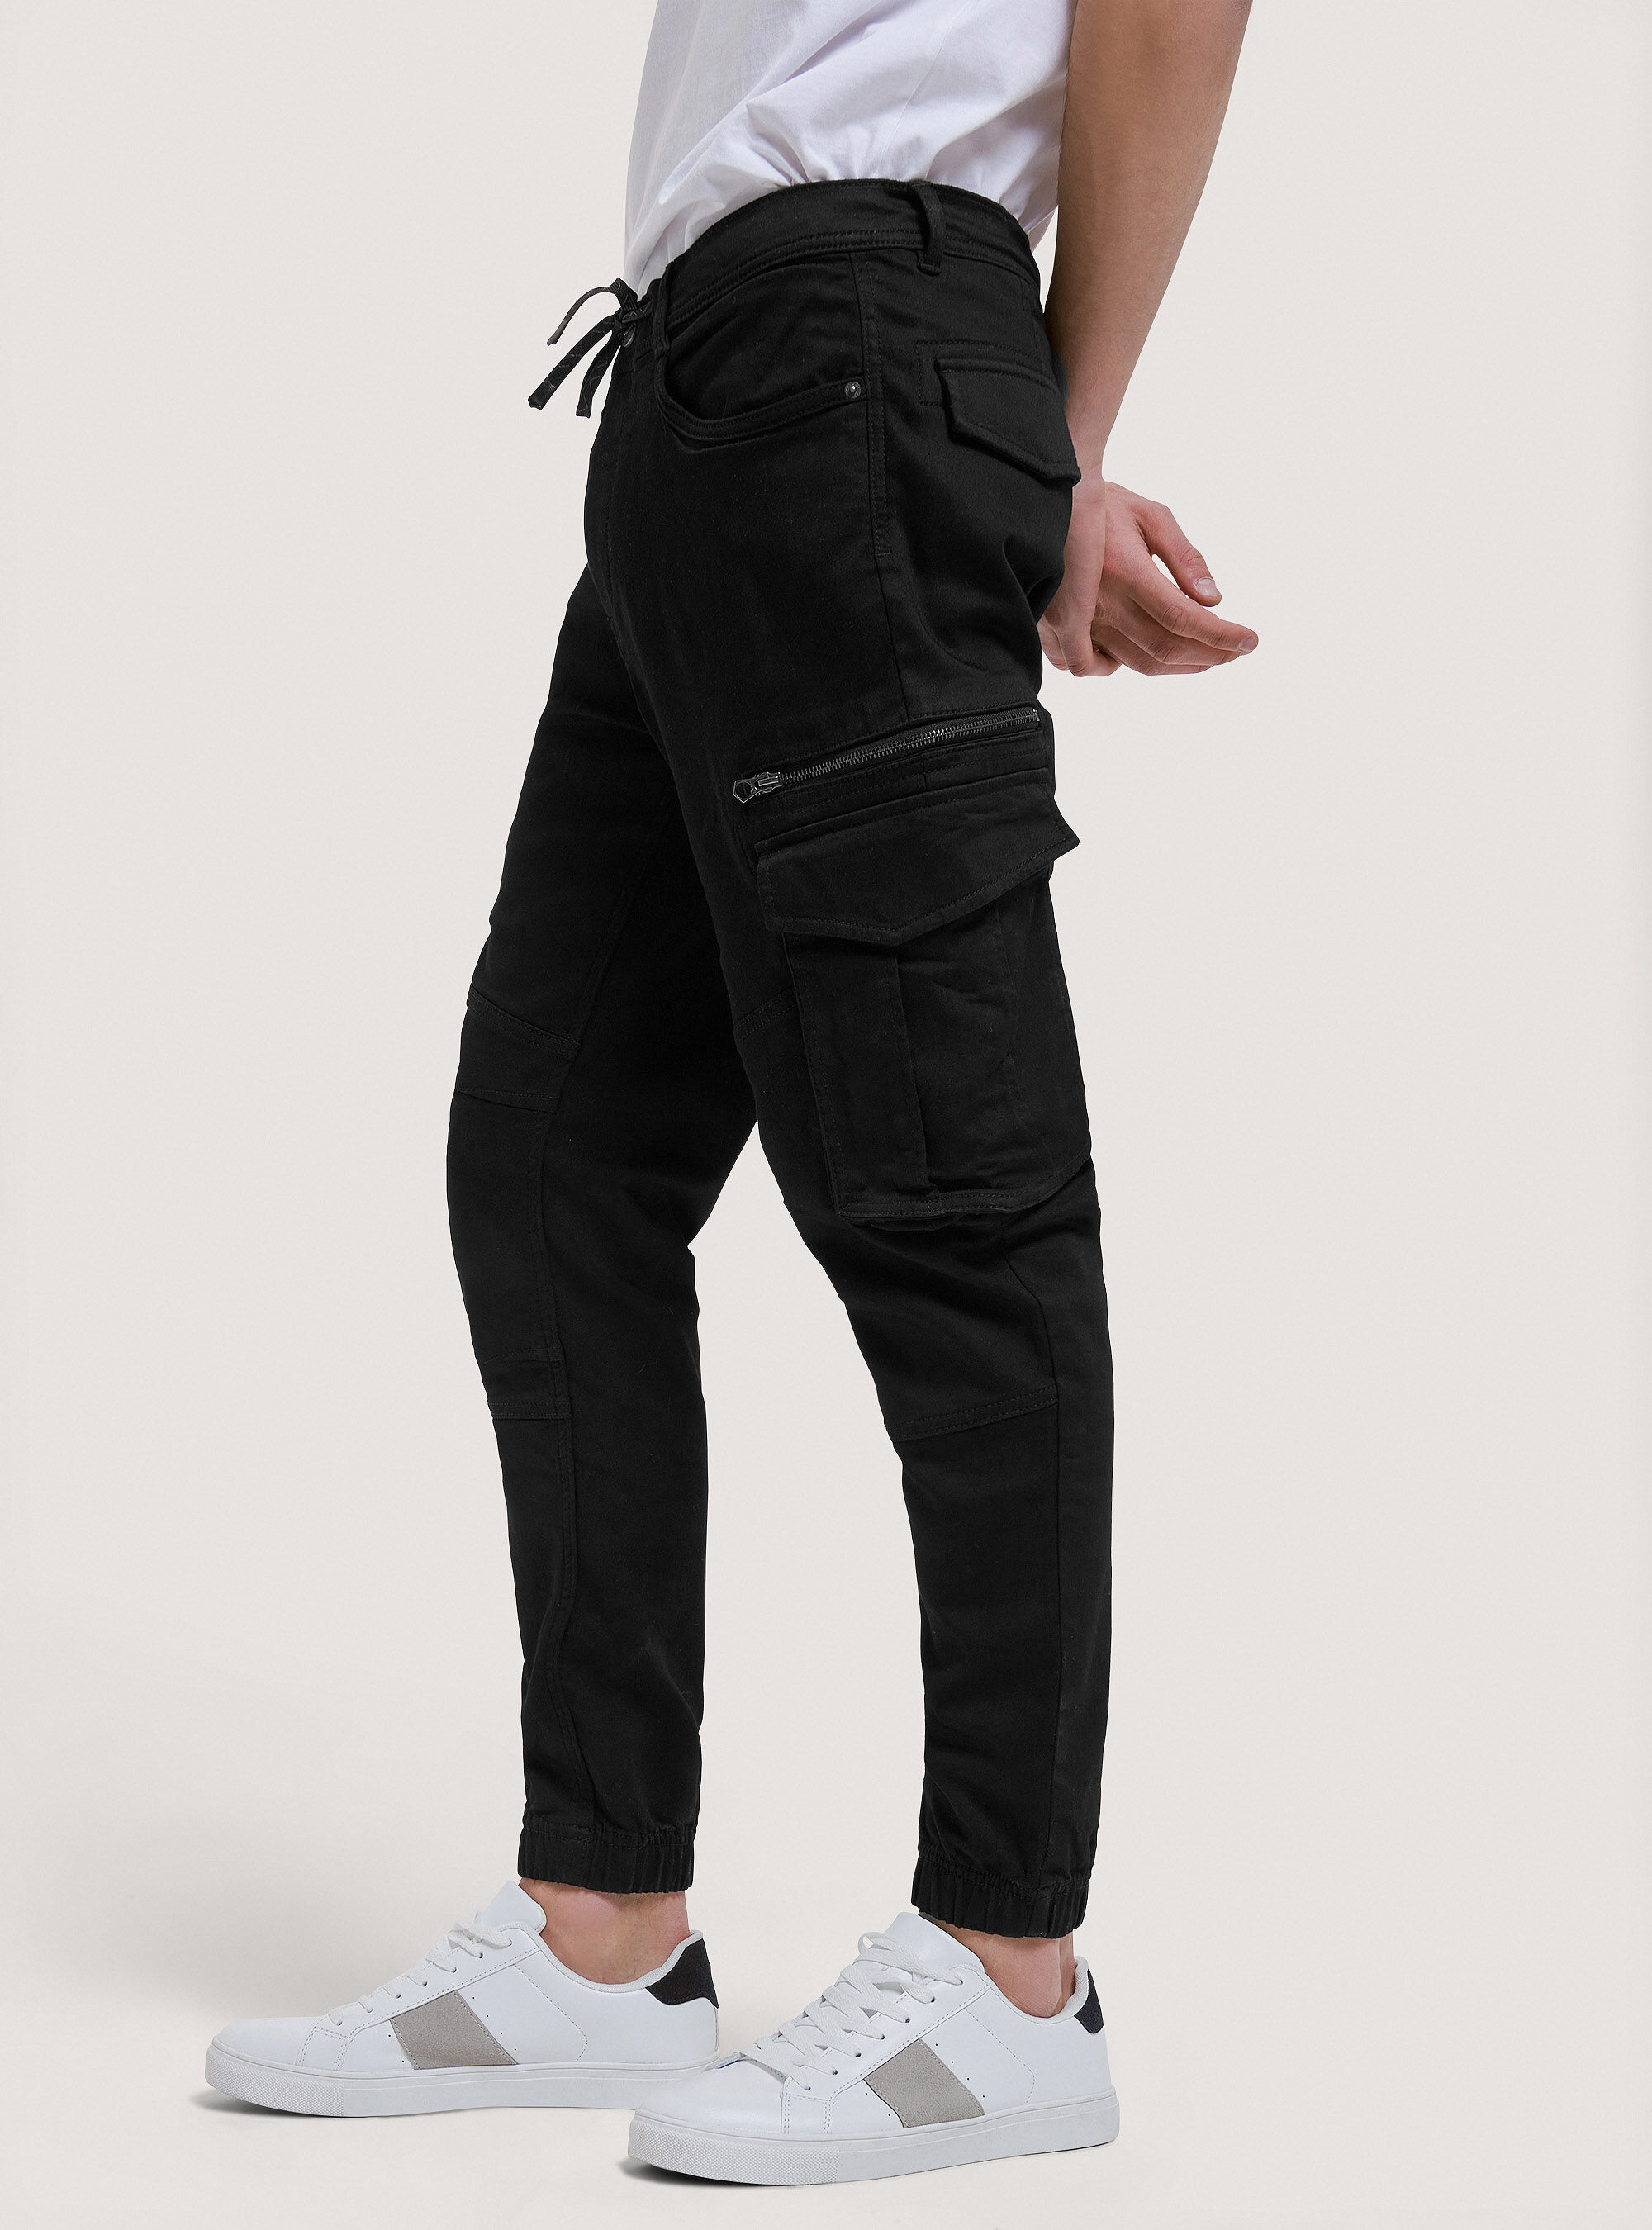 Chain the Subject Cargo Pants  Nasty Gal